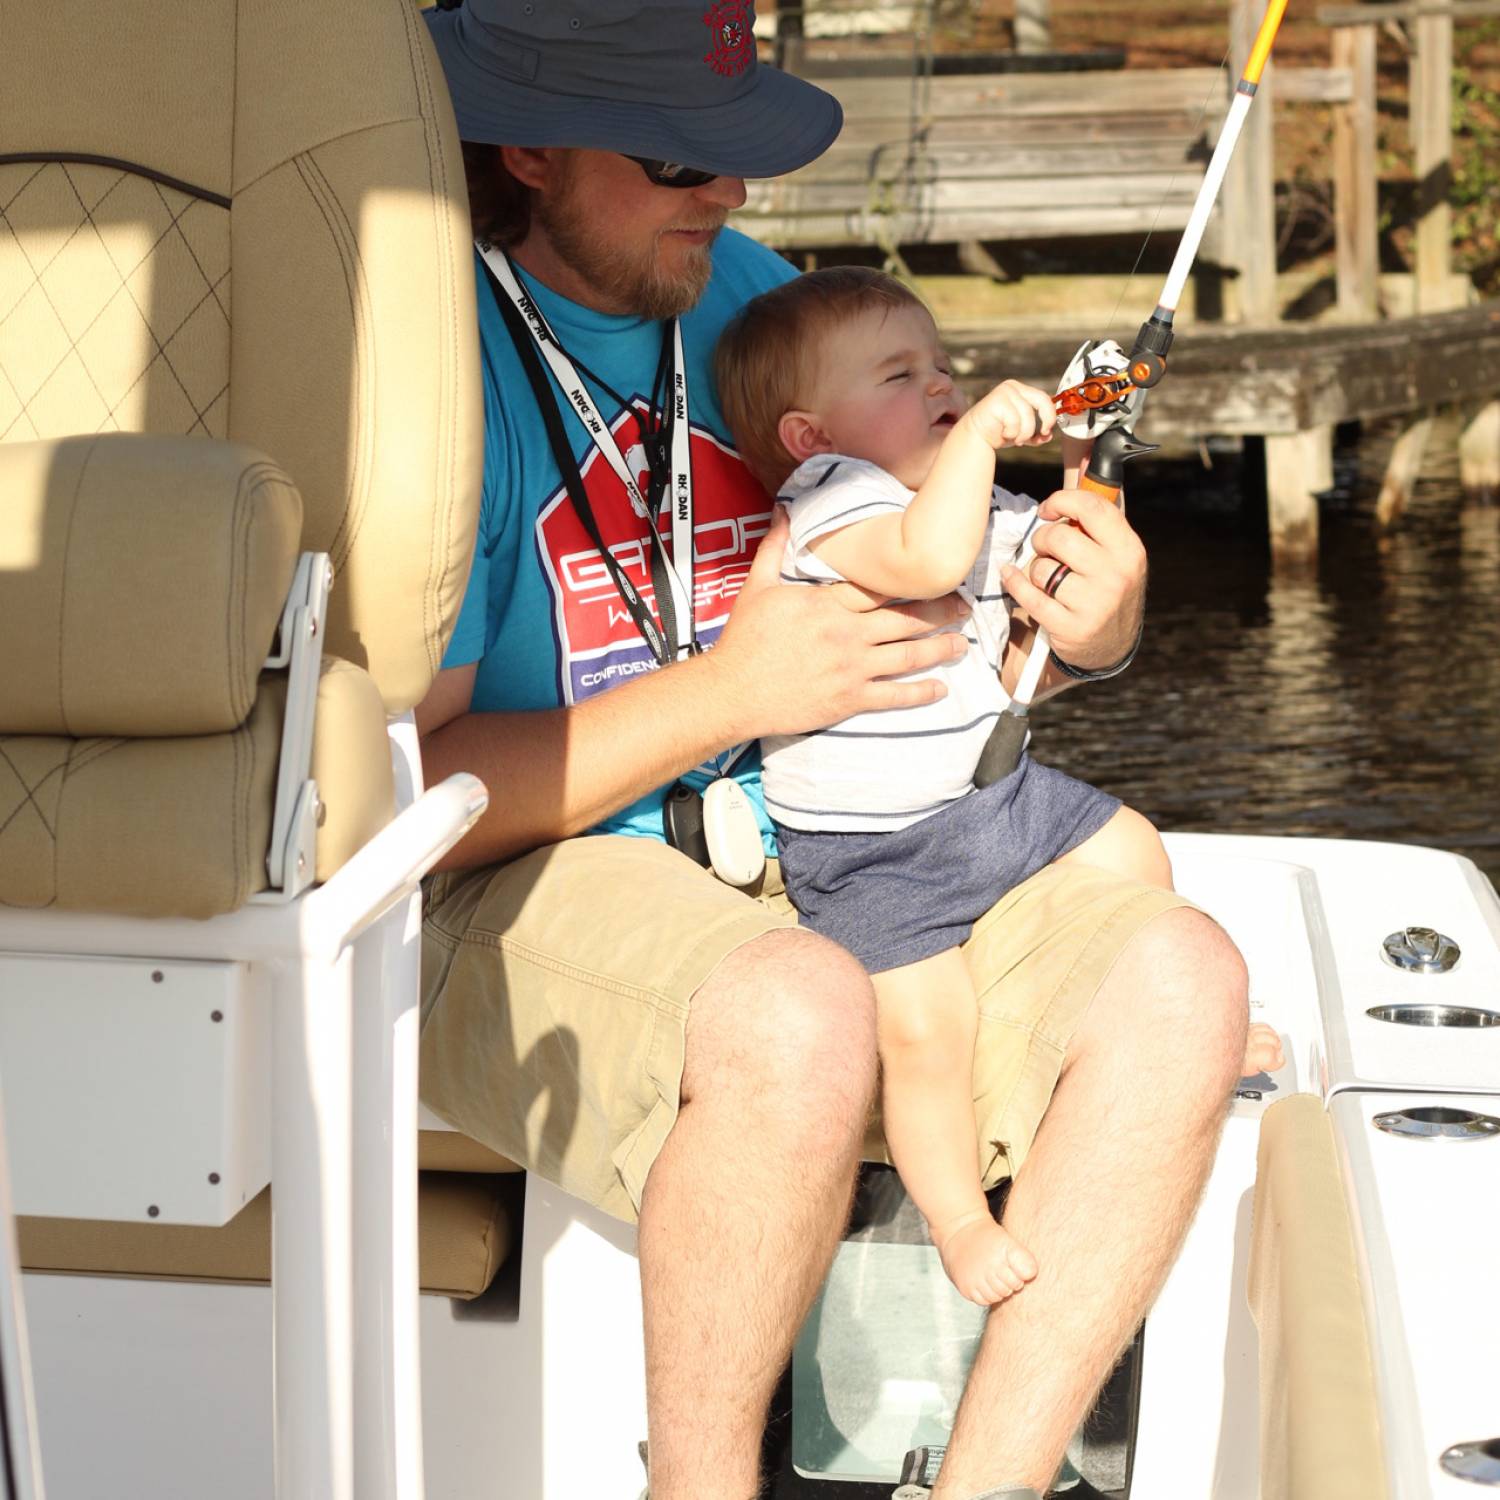 Title: Reeling in his first fosh - On board their Sportsman Masters 247OE Bay Boat - Location: Lake Mayers. Participating in the Photo Contest #SportsmanJanuary2022